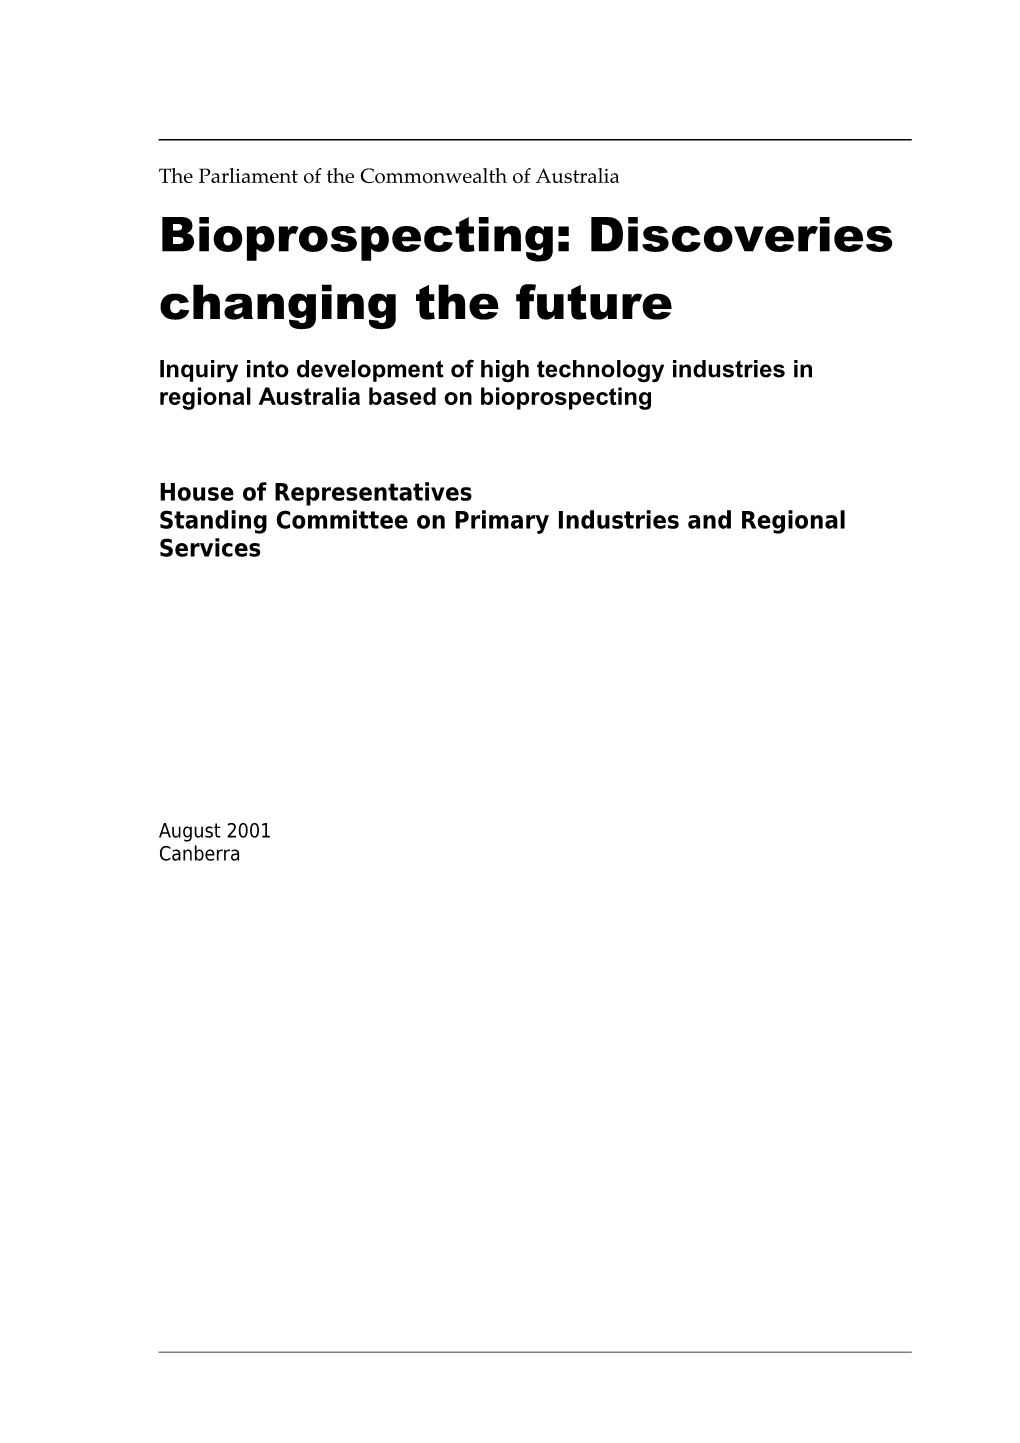 Bioprospecting: Discoveries Changing the Future